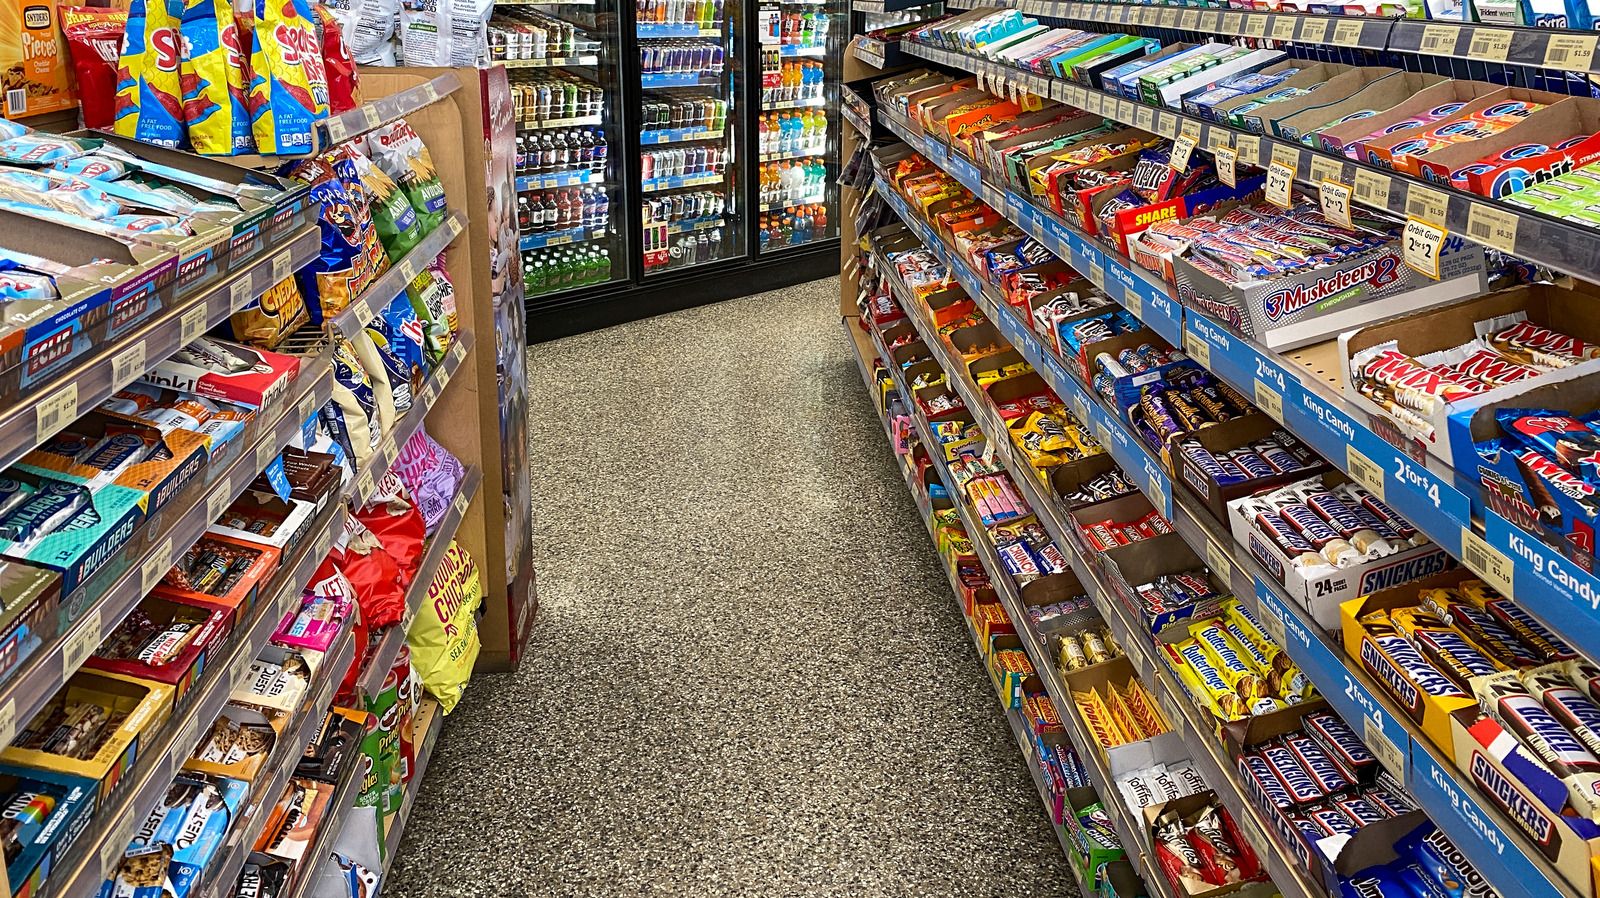 The Pennsylvania Gas Station Chain With Some Pretty Unique Snack Innovations – The Daily Meal